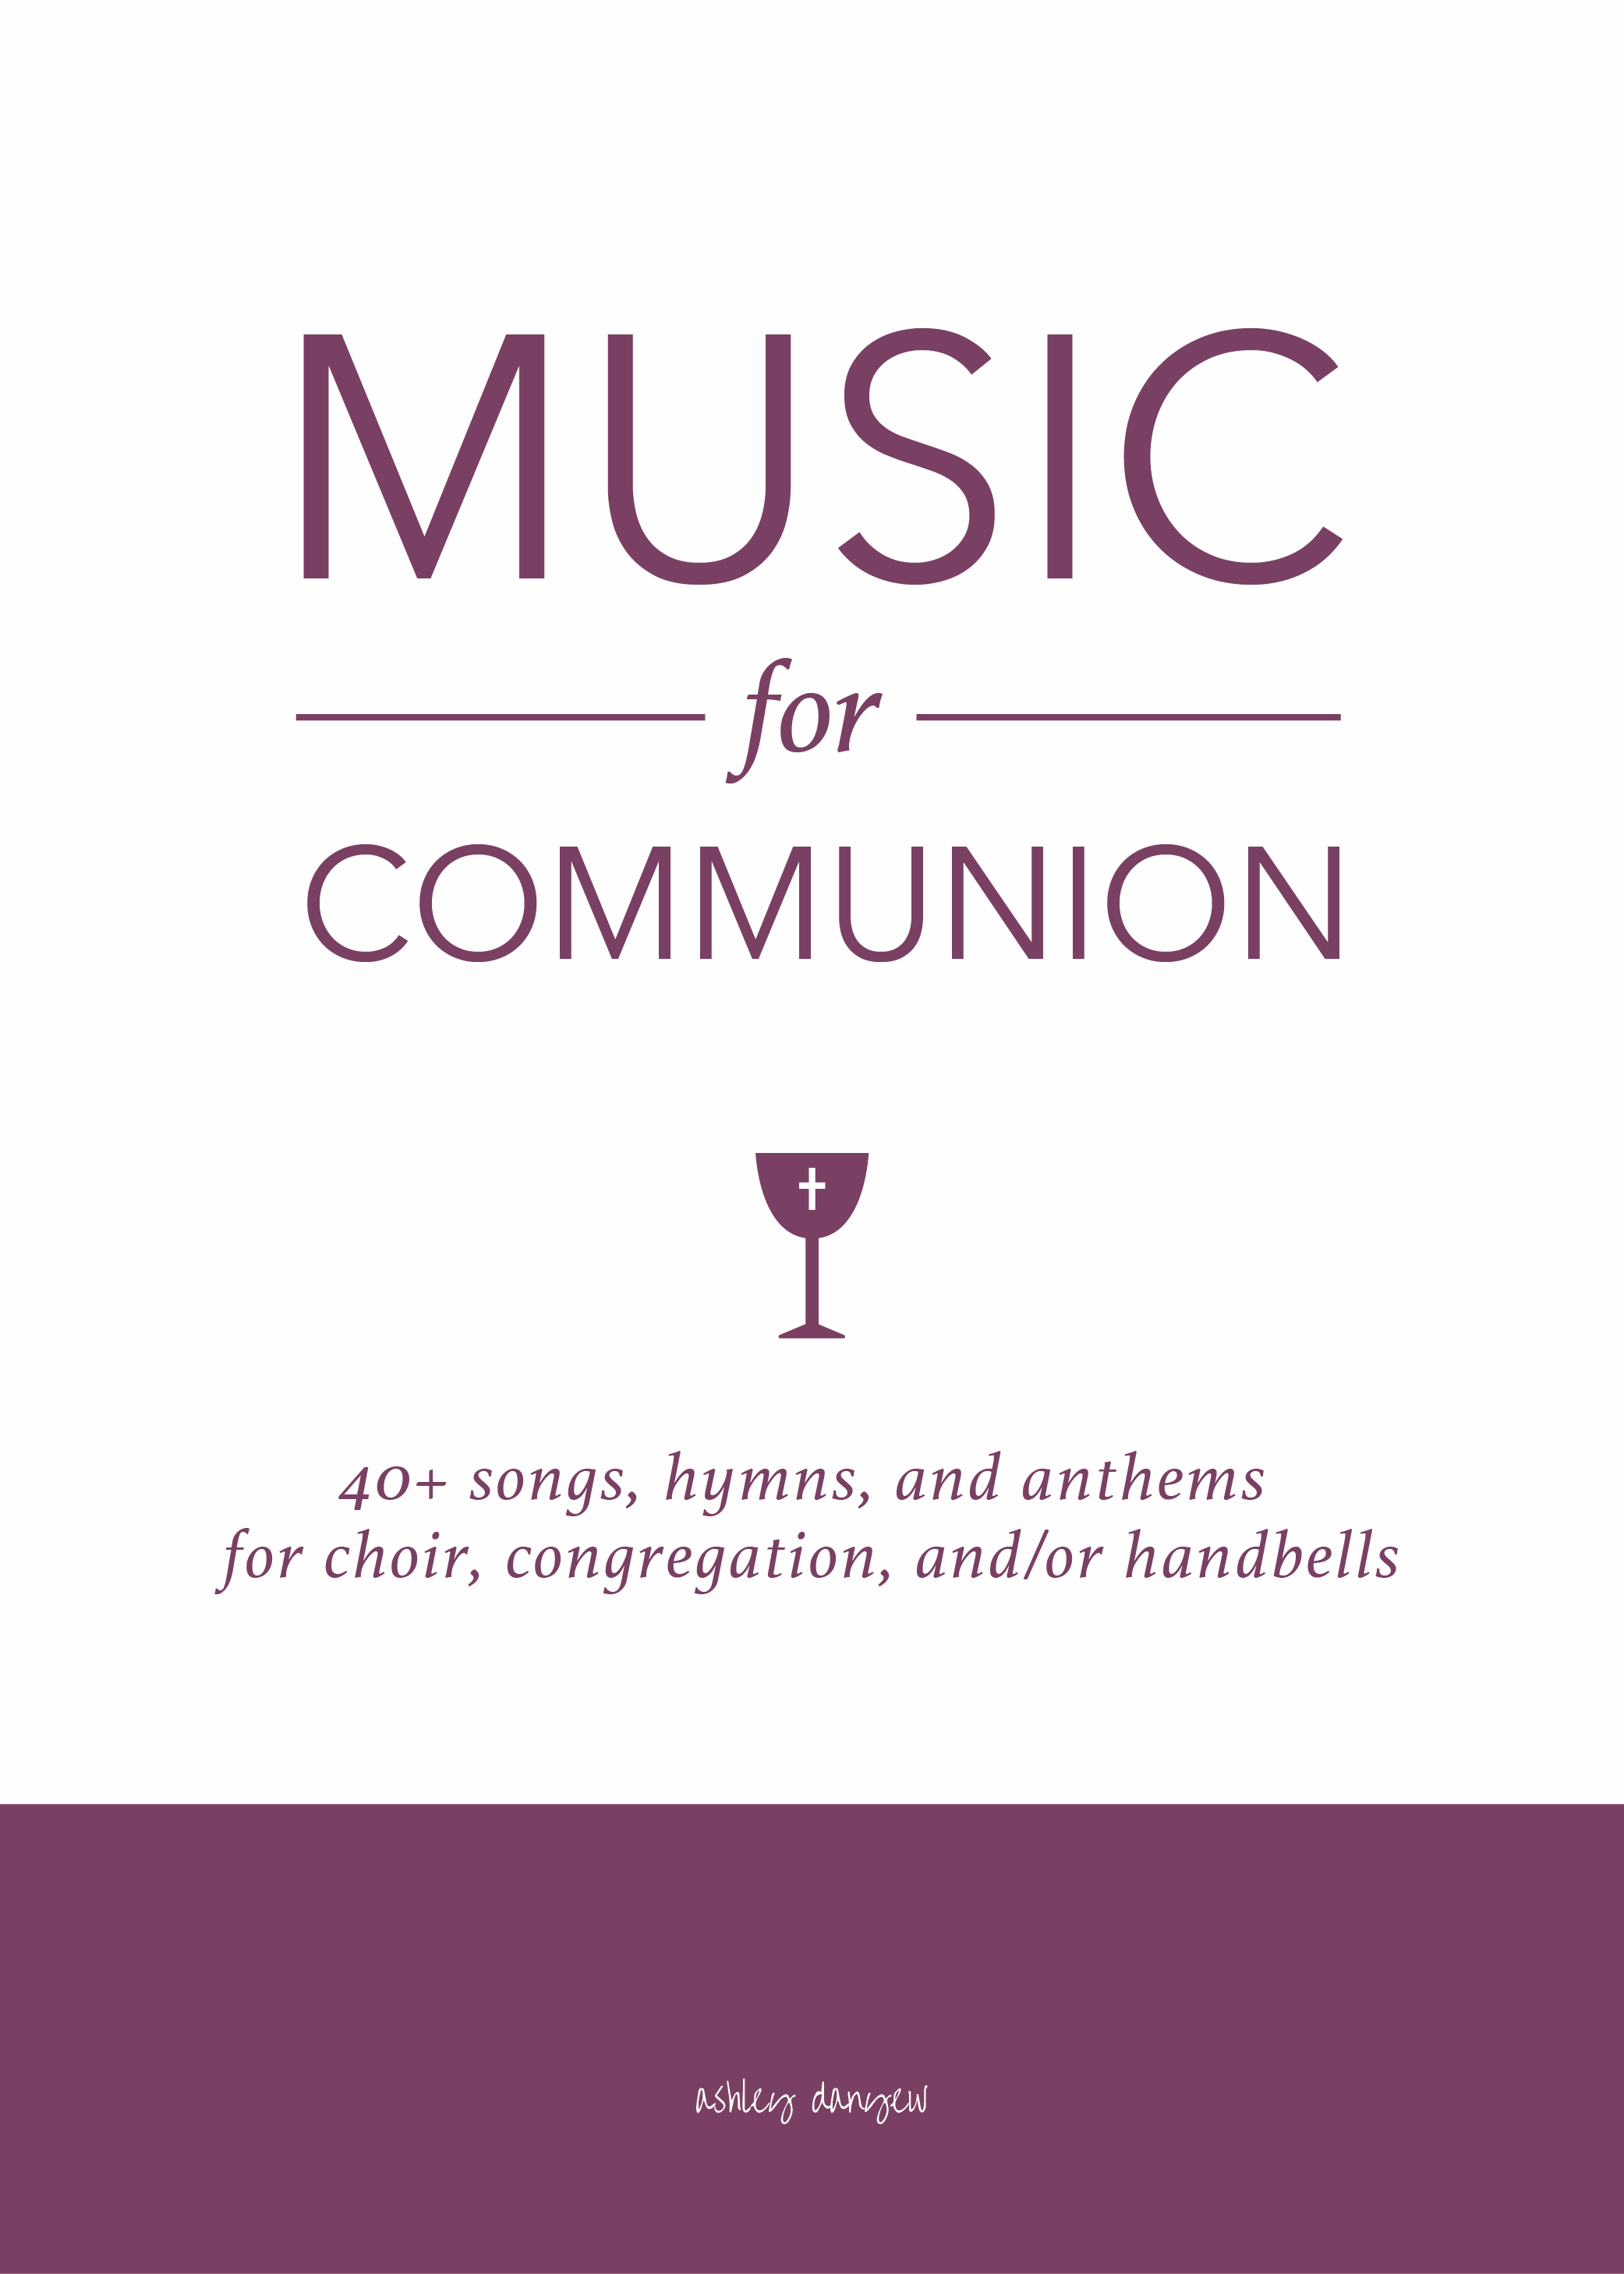 Music for Communion-01.png